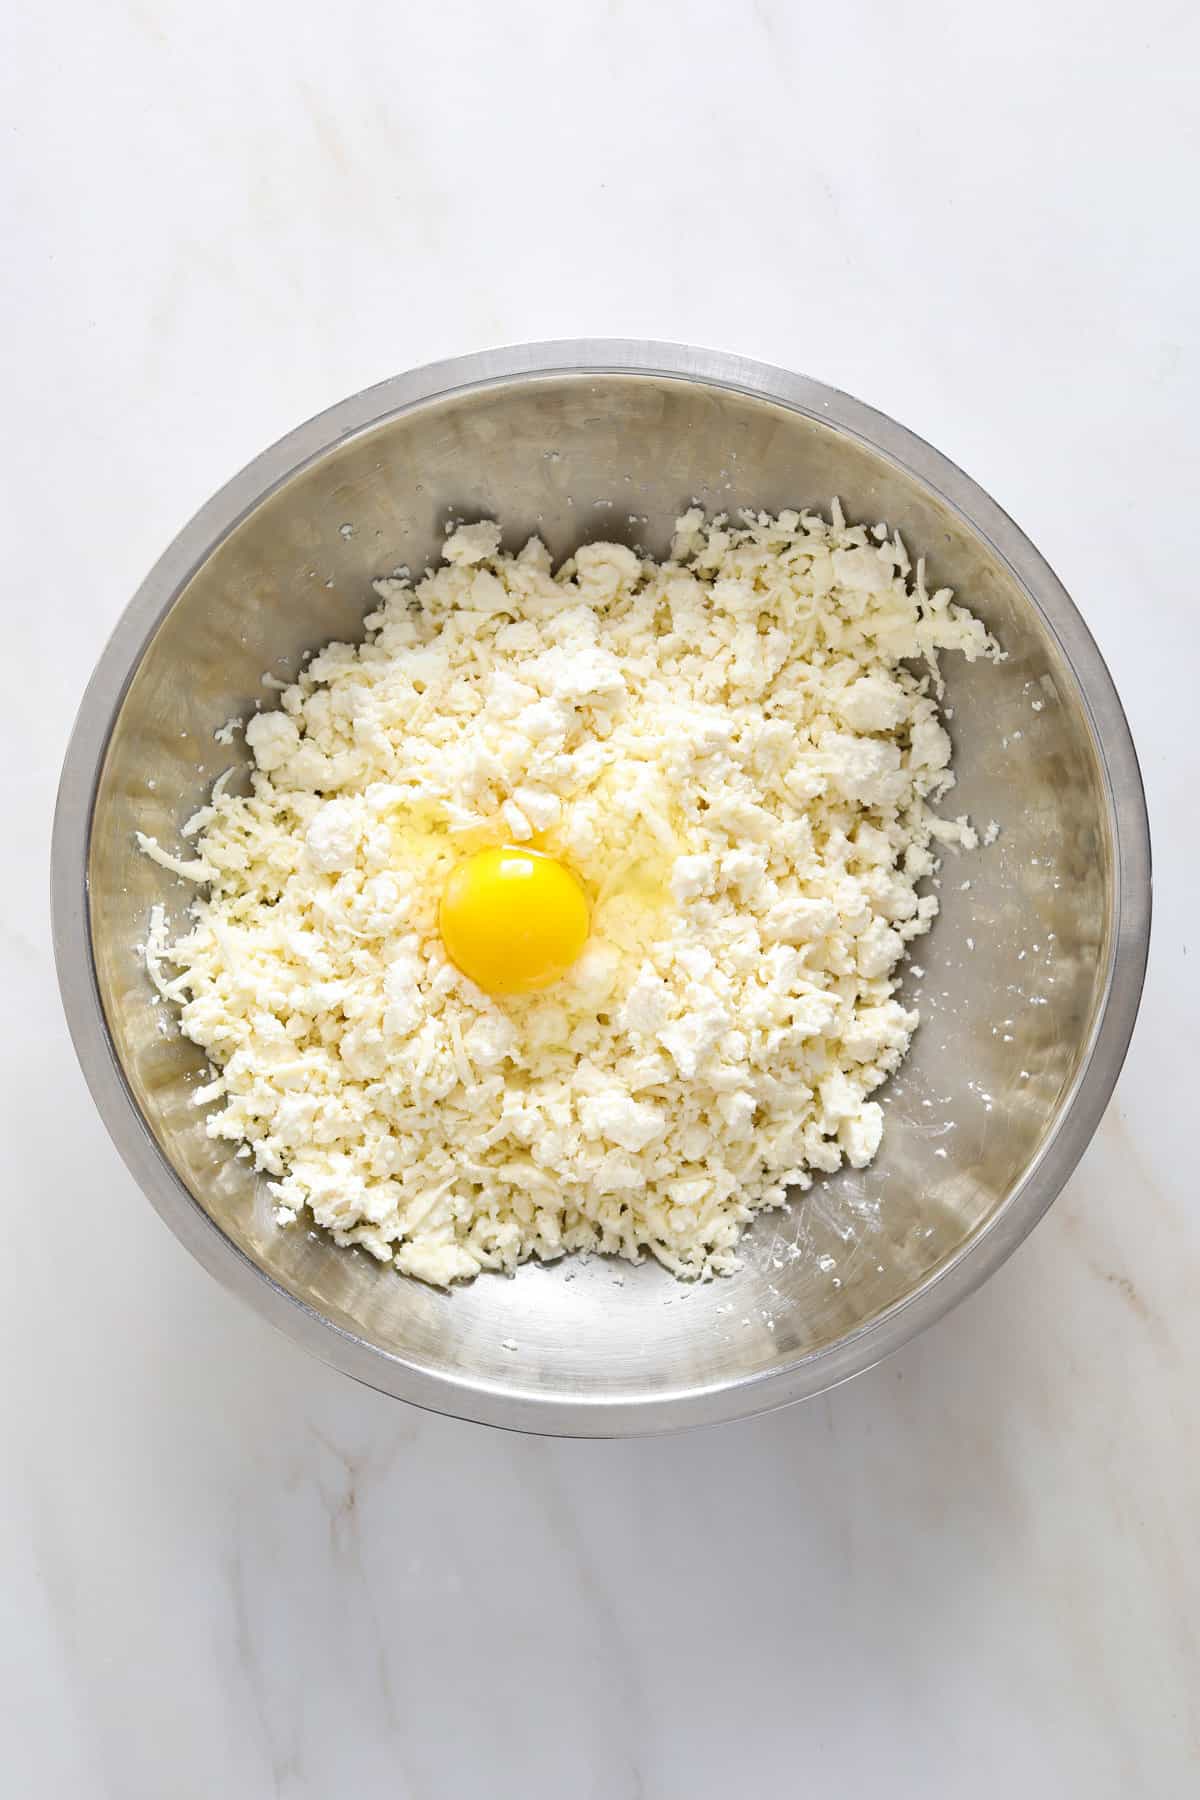 A stainless steel mixing bowl filled grated cheese and a whole egg.